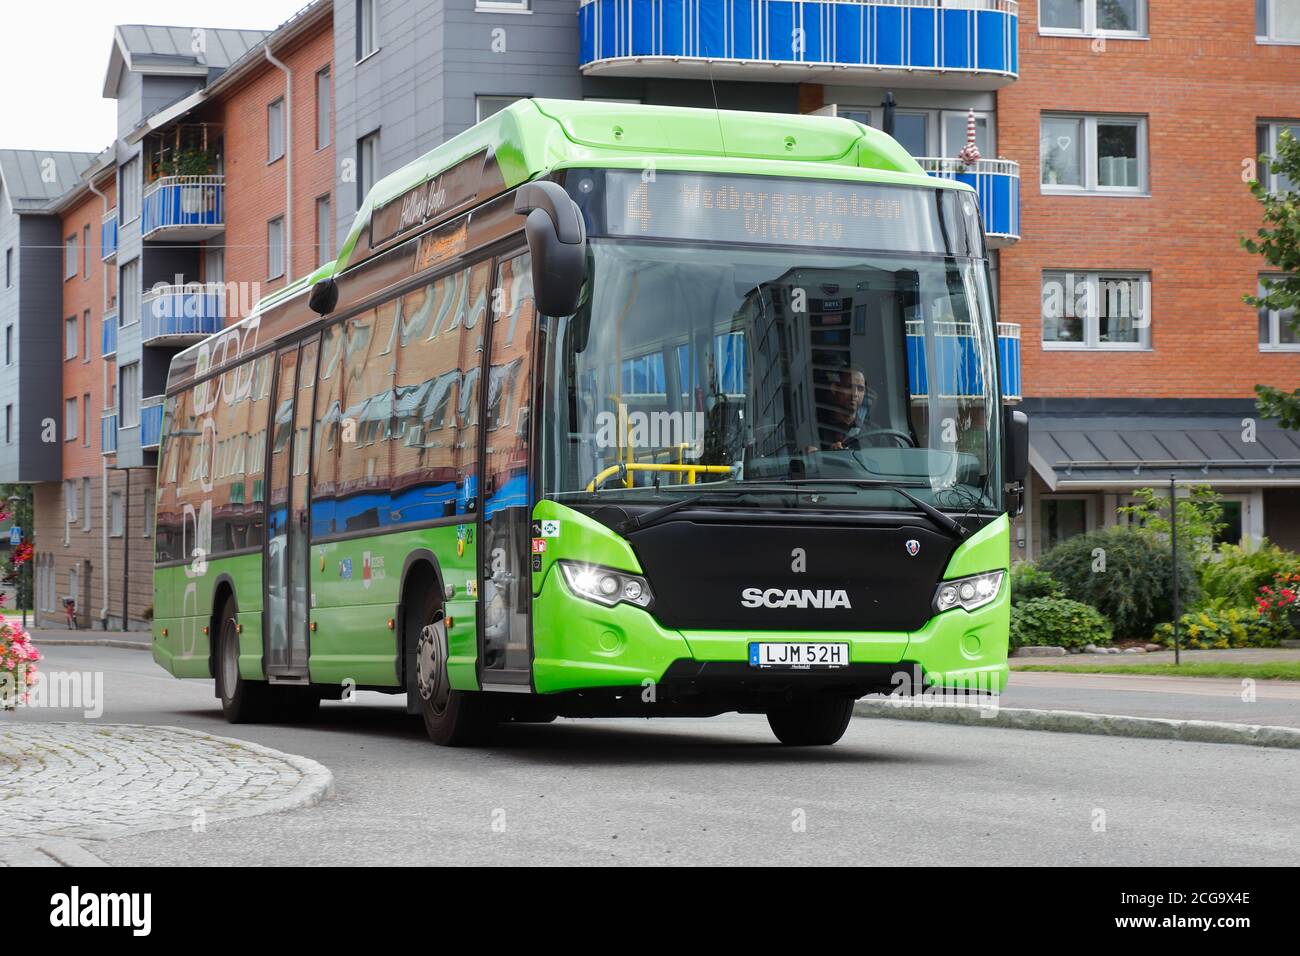 Boden, Sweden - August 25, 2020: A green Scania Citywide LE  fuel public transportation bus in the city center operated on CNG fuel. Stock Photo